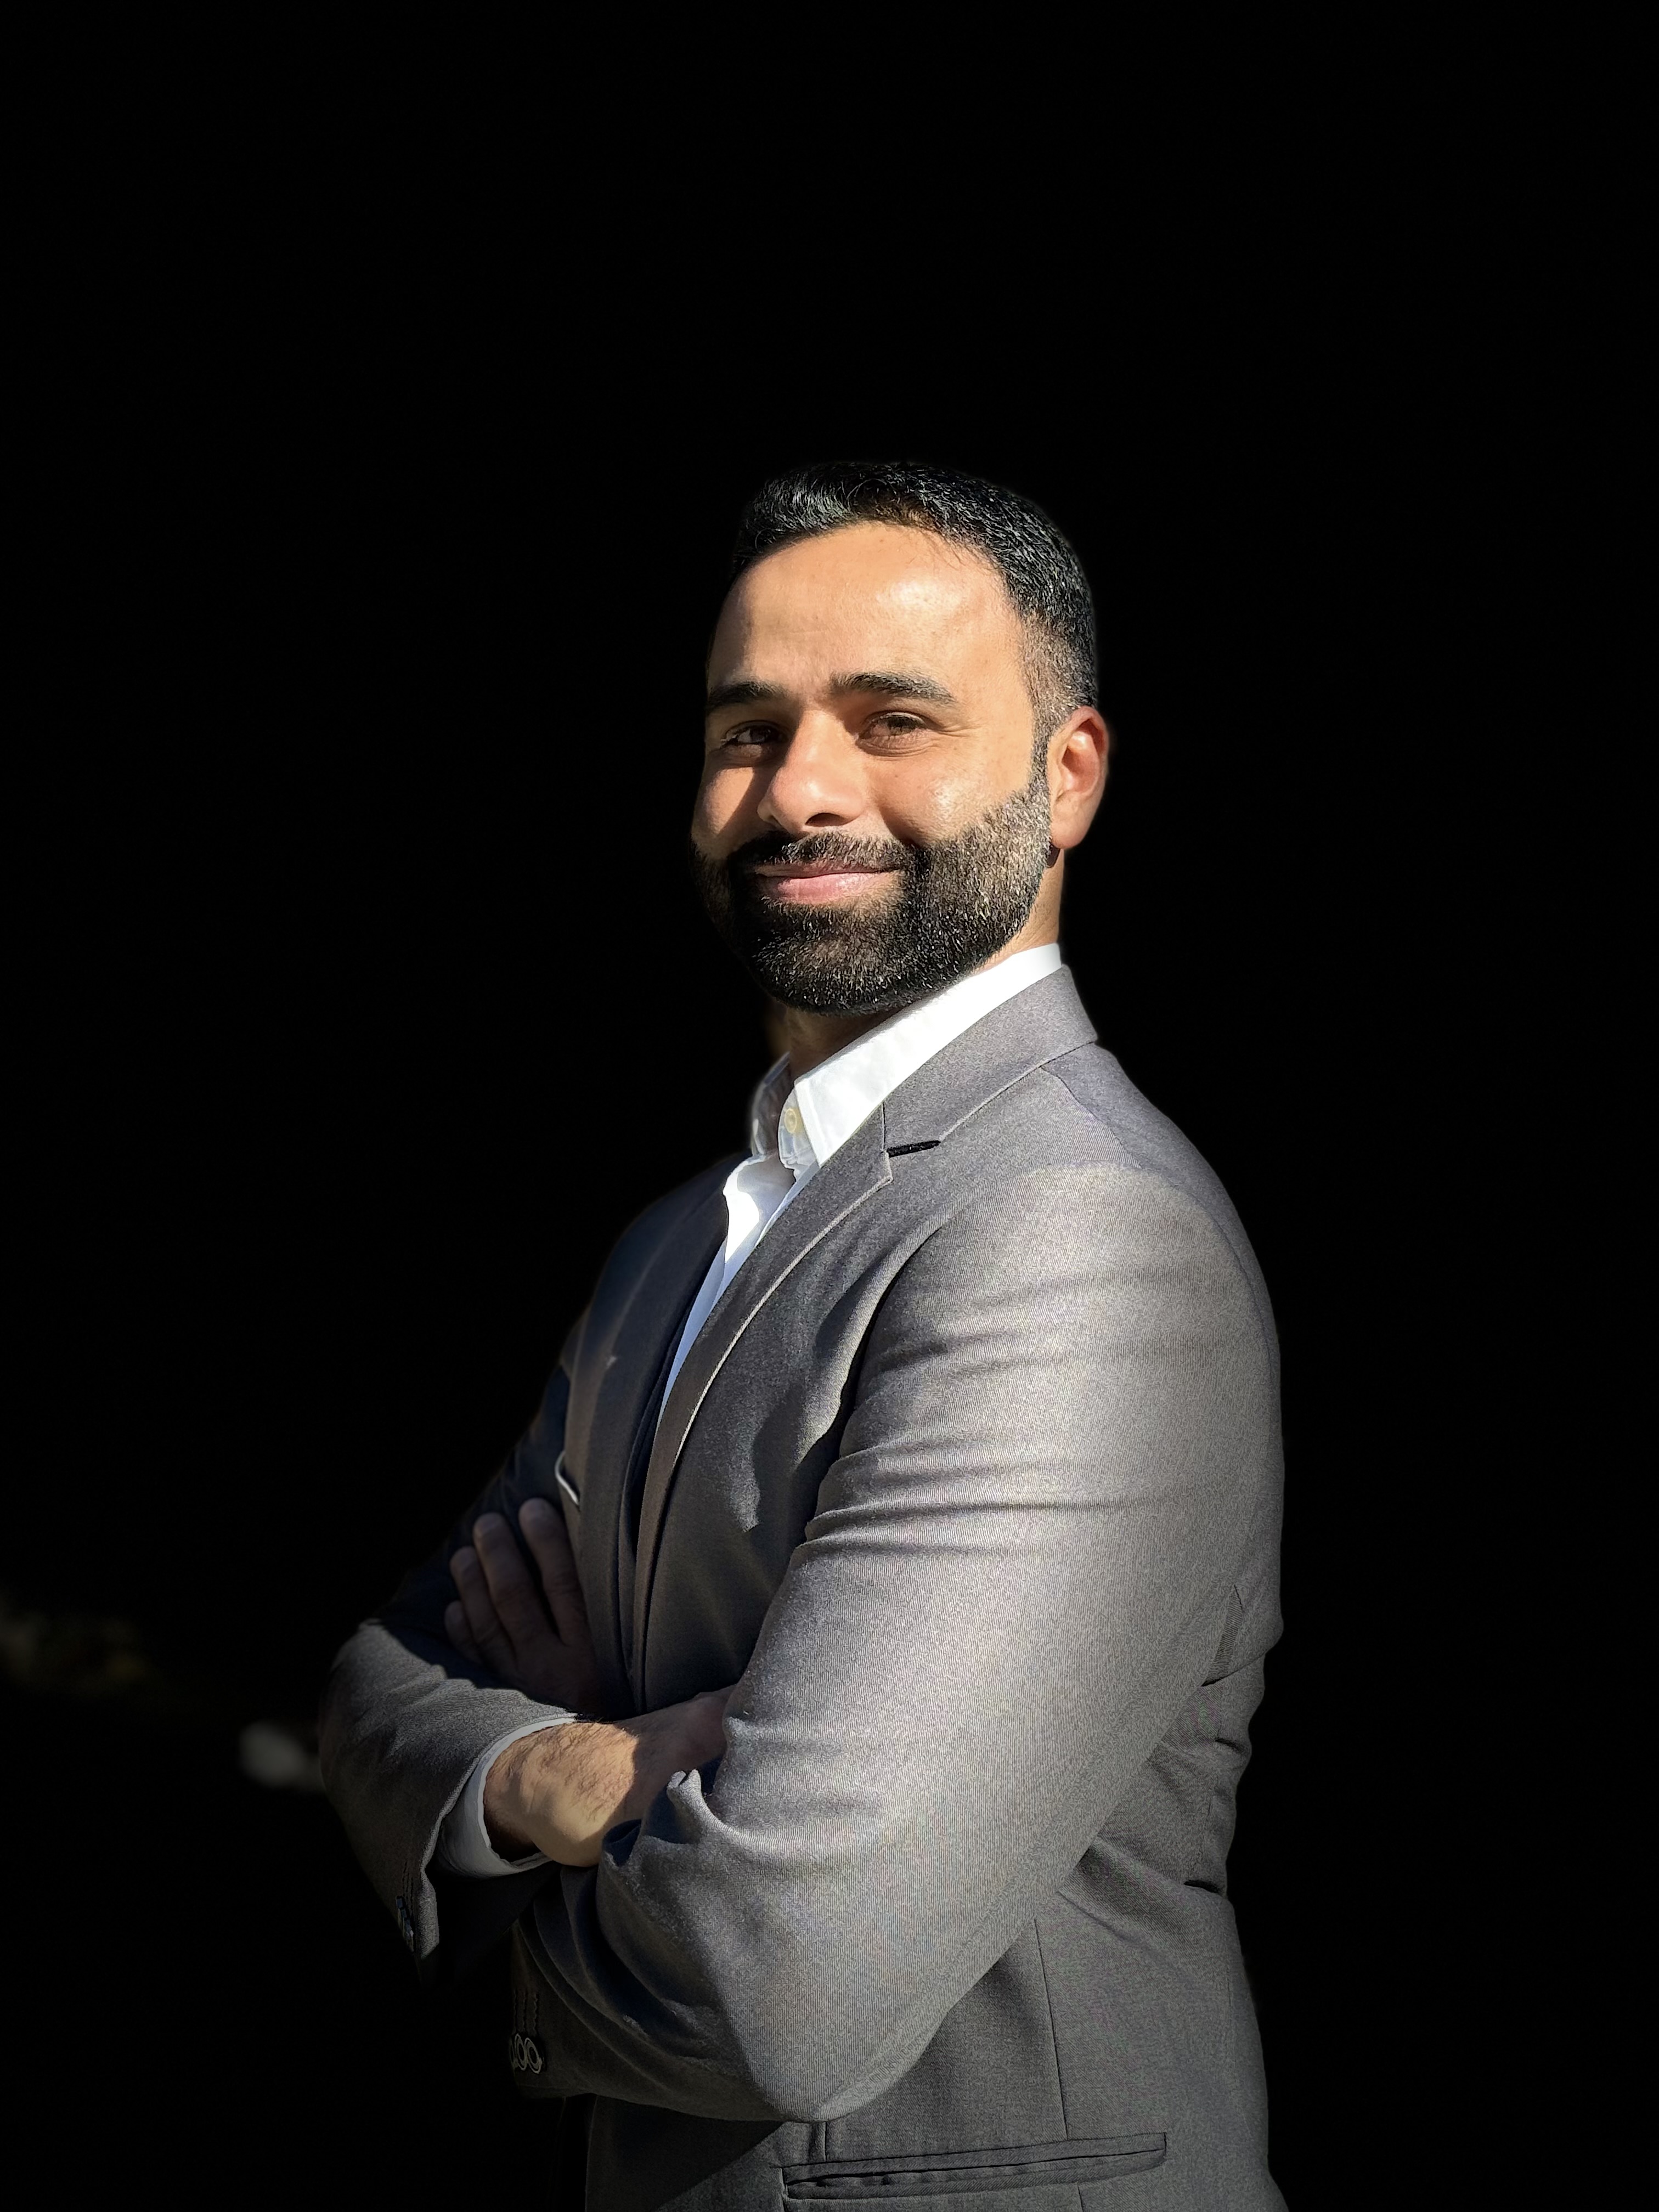 A professional portrait of a male realtor in a gray suit, standing with arms crossed, smiling confidently against a black background